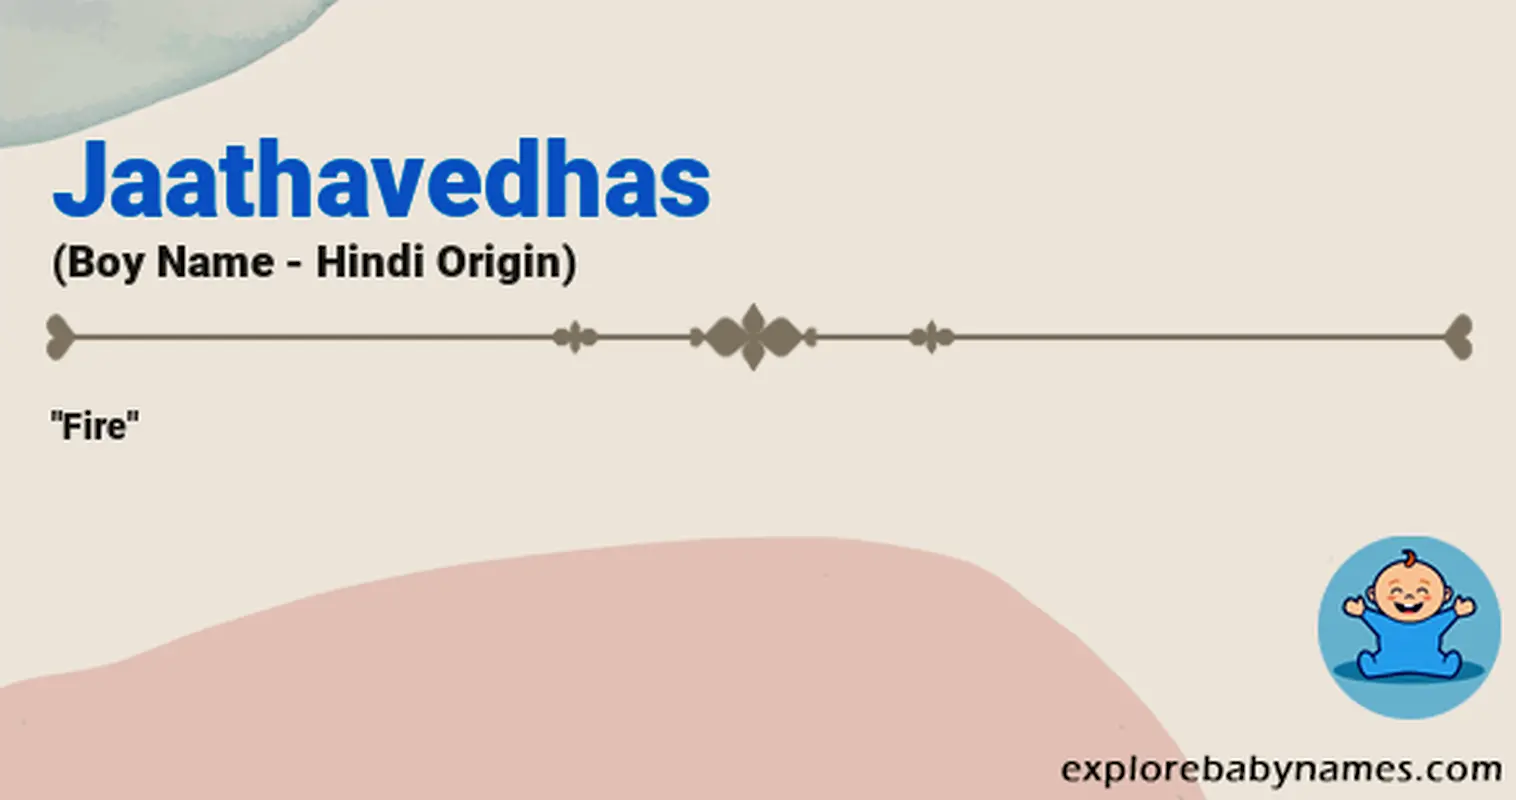 Meaning of Jaathavedhas